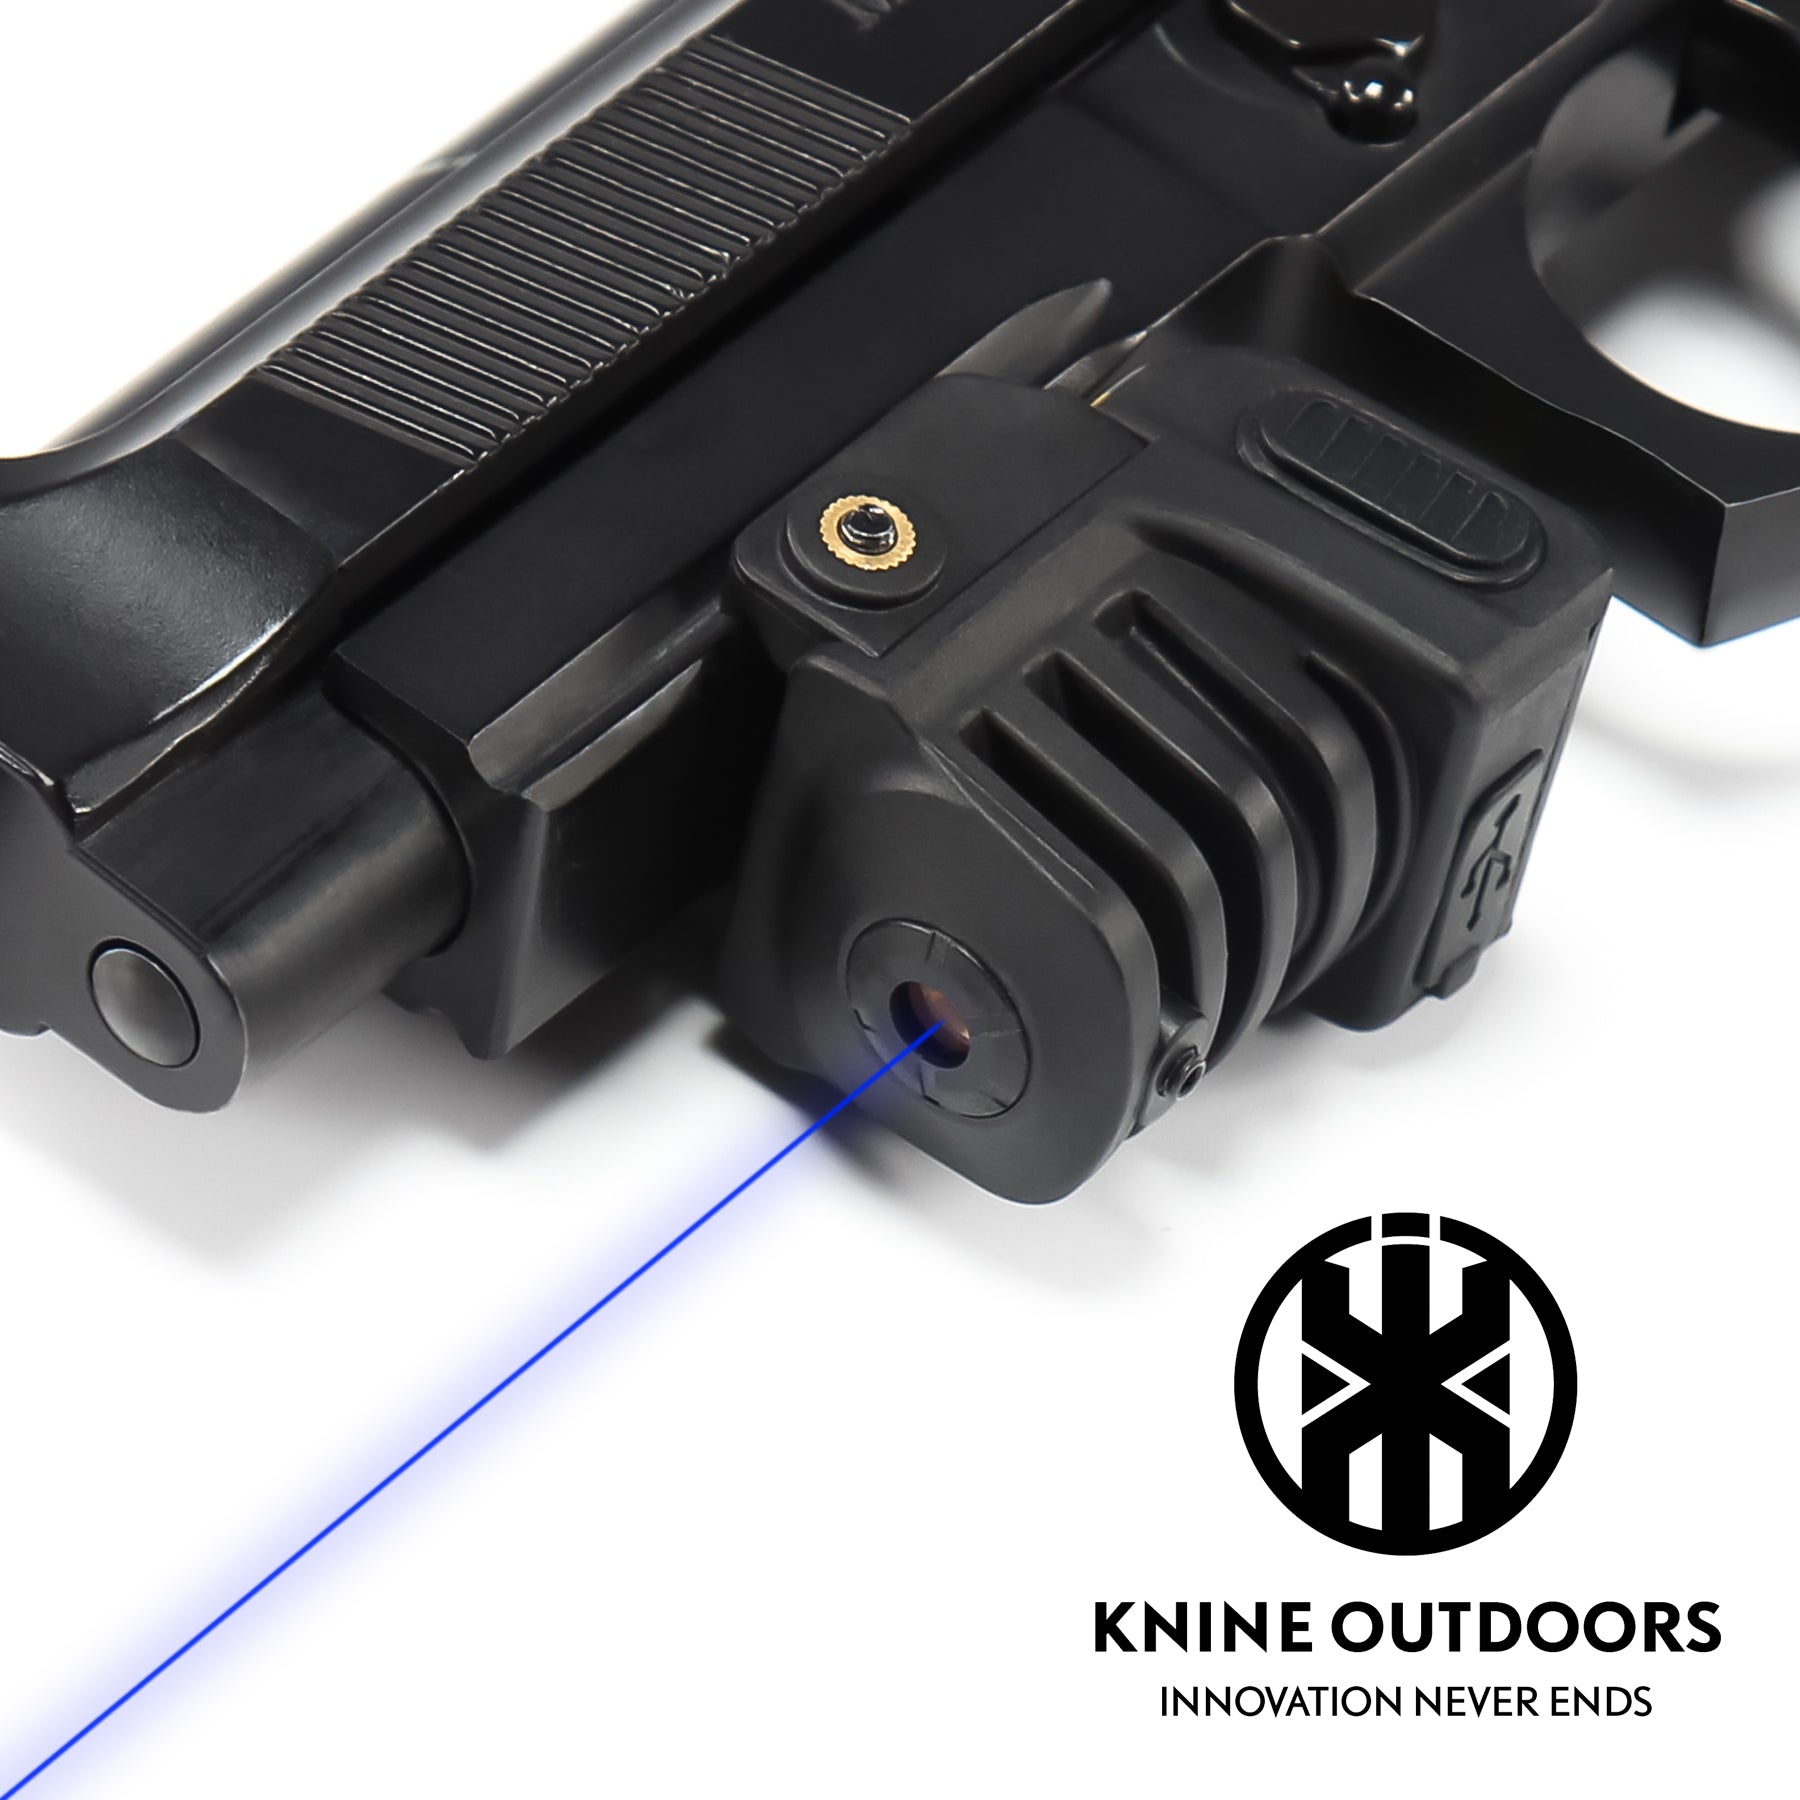 KNINE OUTDOORS Compact Handgun Blue Laser Sight for Picatinny Rail Mount